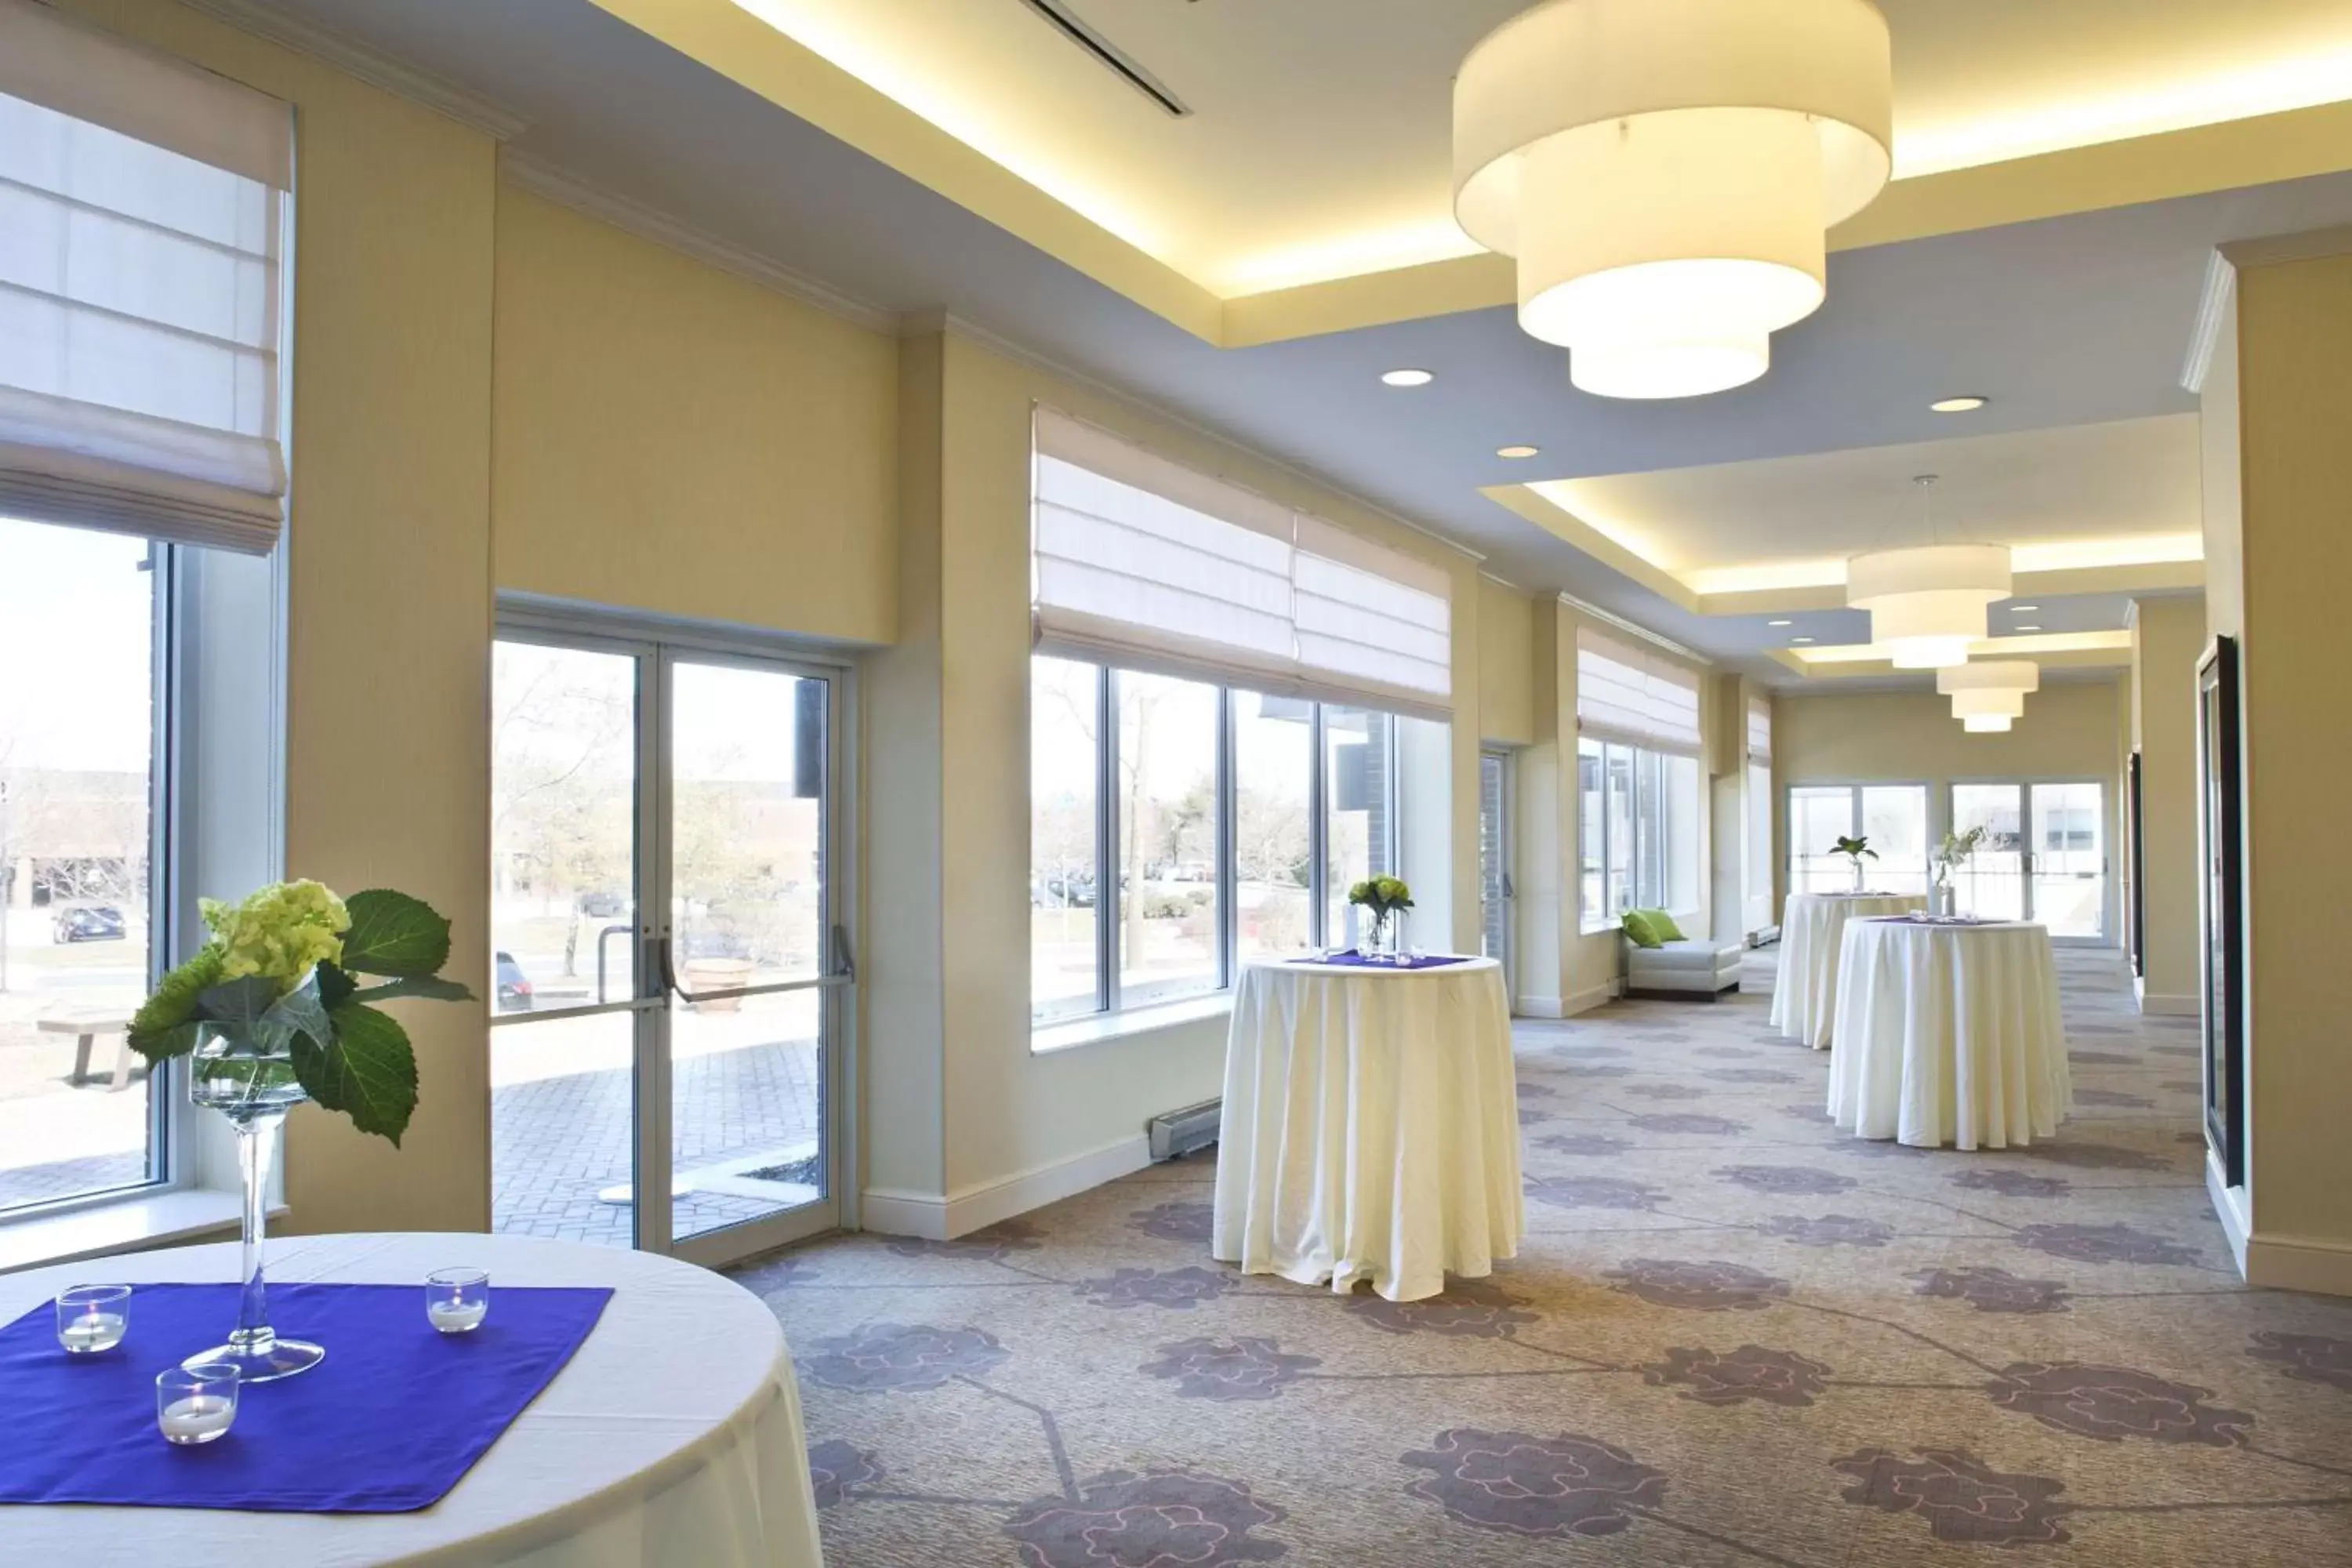 Meeting/conference room, Banquet Facilities in Hilton Garden Inn White Marsh